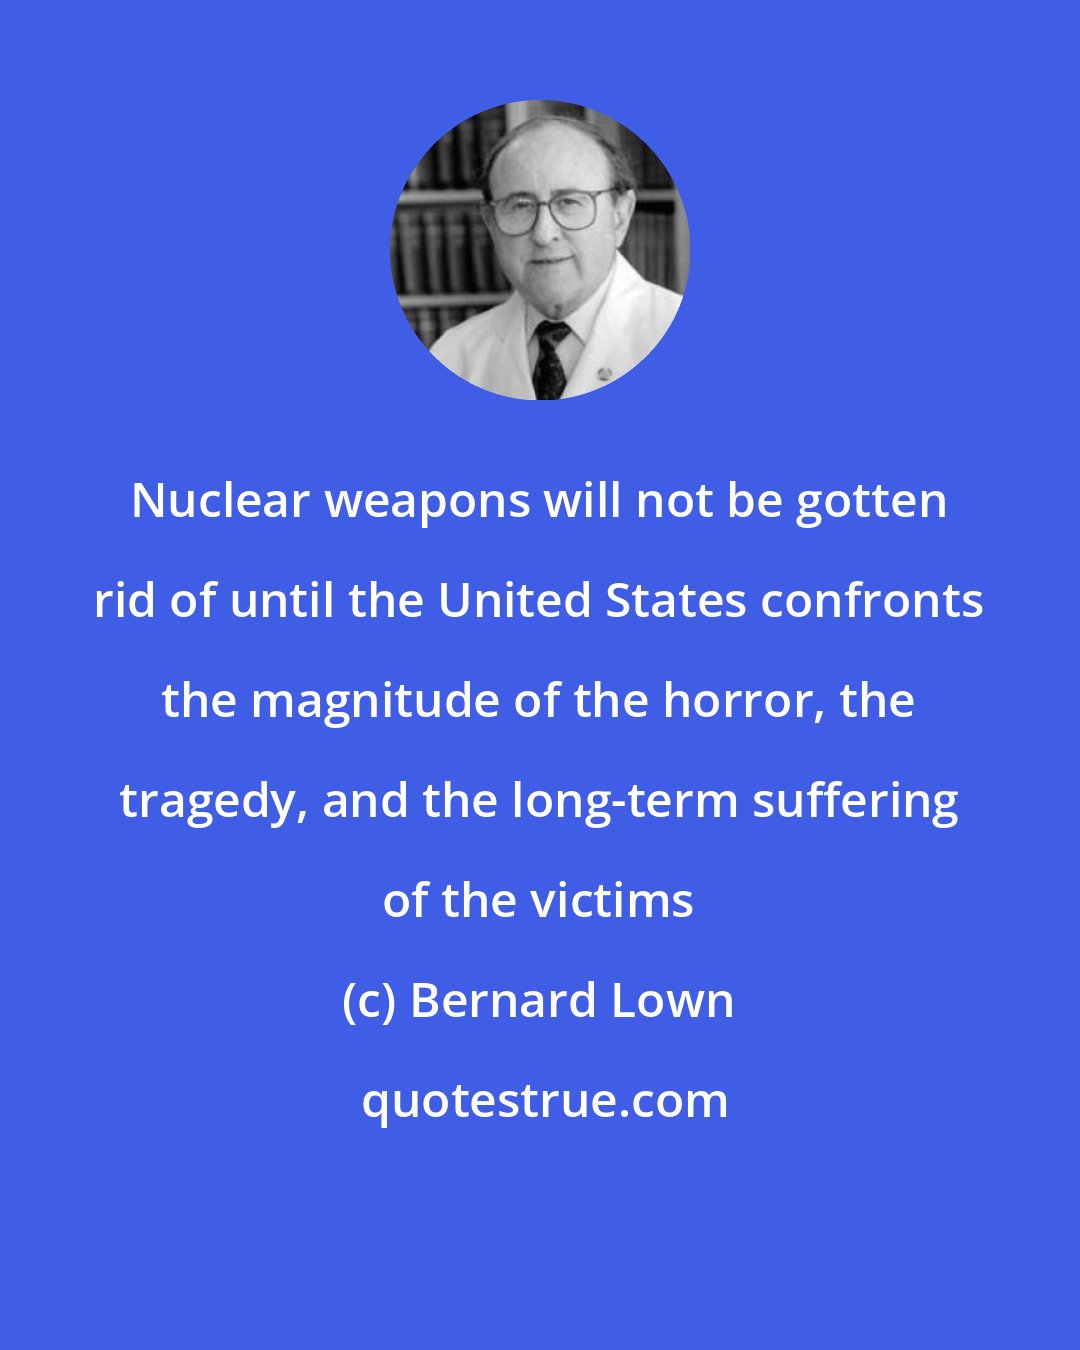 Bernard Lown: Nuclear weapons will not be gotten rid of until the United States confronts the magnitude of the horror, the tragedy, and the long-term suffering of the victims